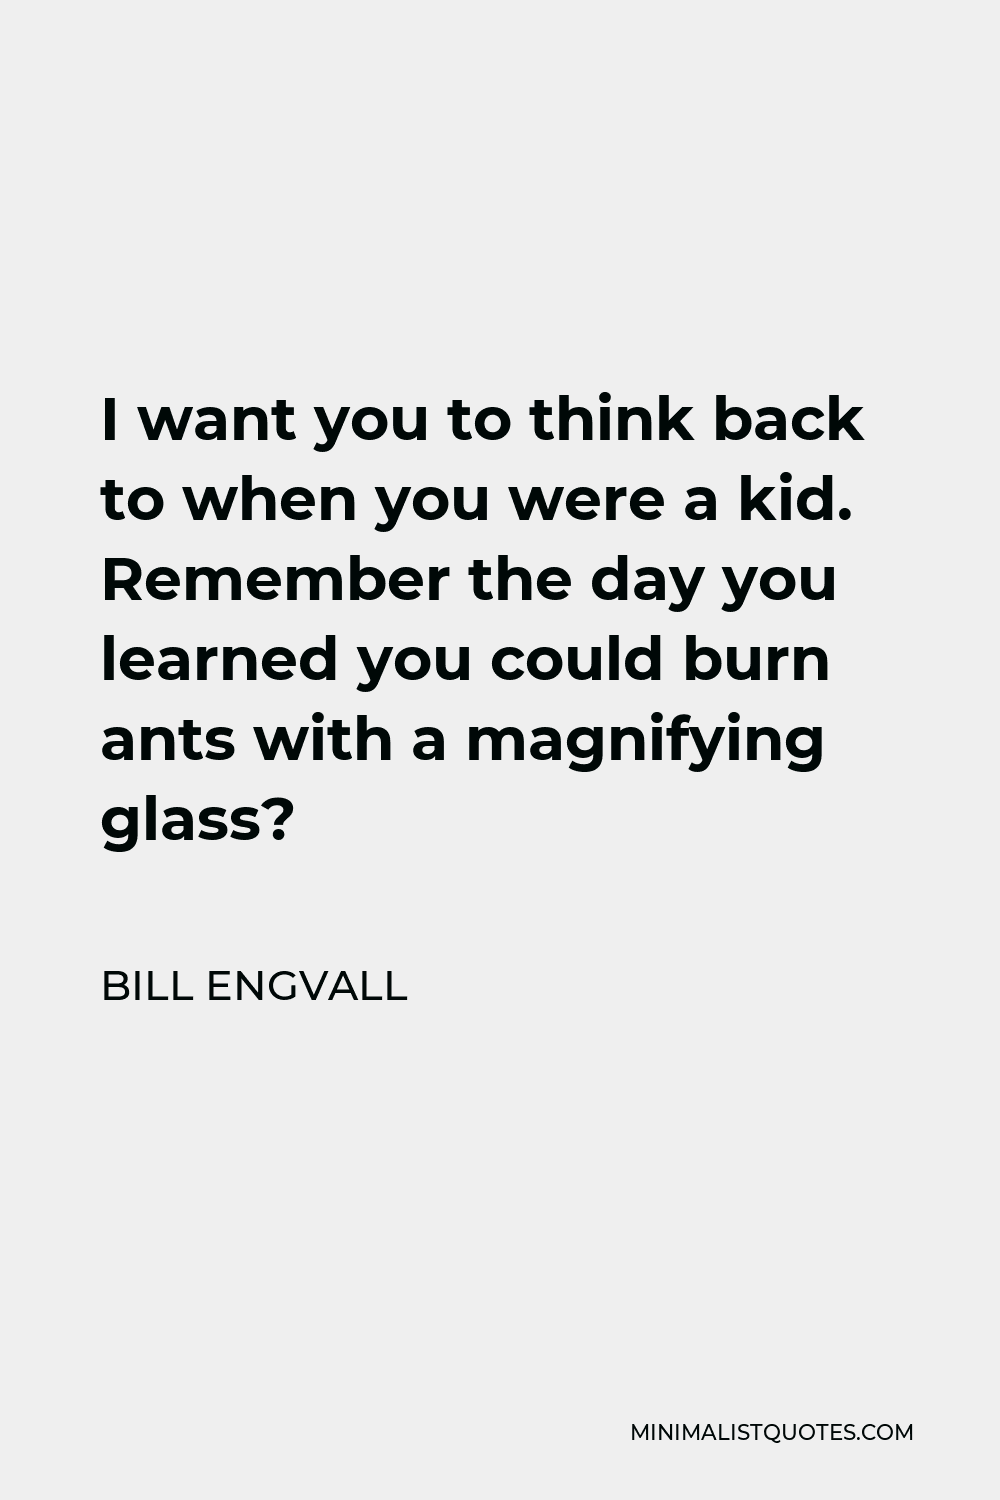 Bill Engvall Quote - I want you to think back to when you were a kid. Remember the day you learned you could burn ants with a magnifying glass?